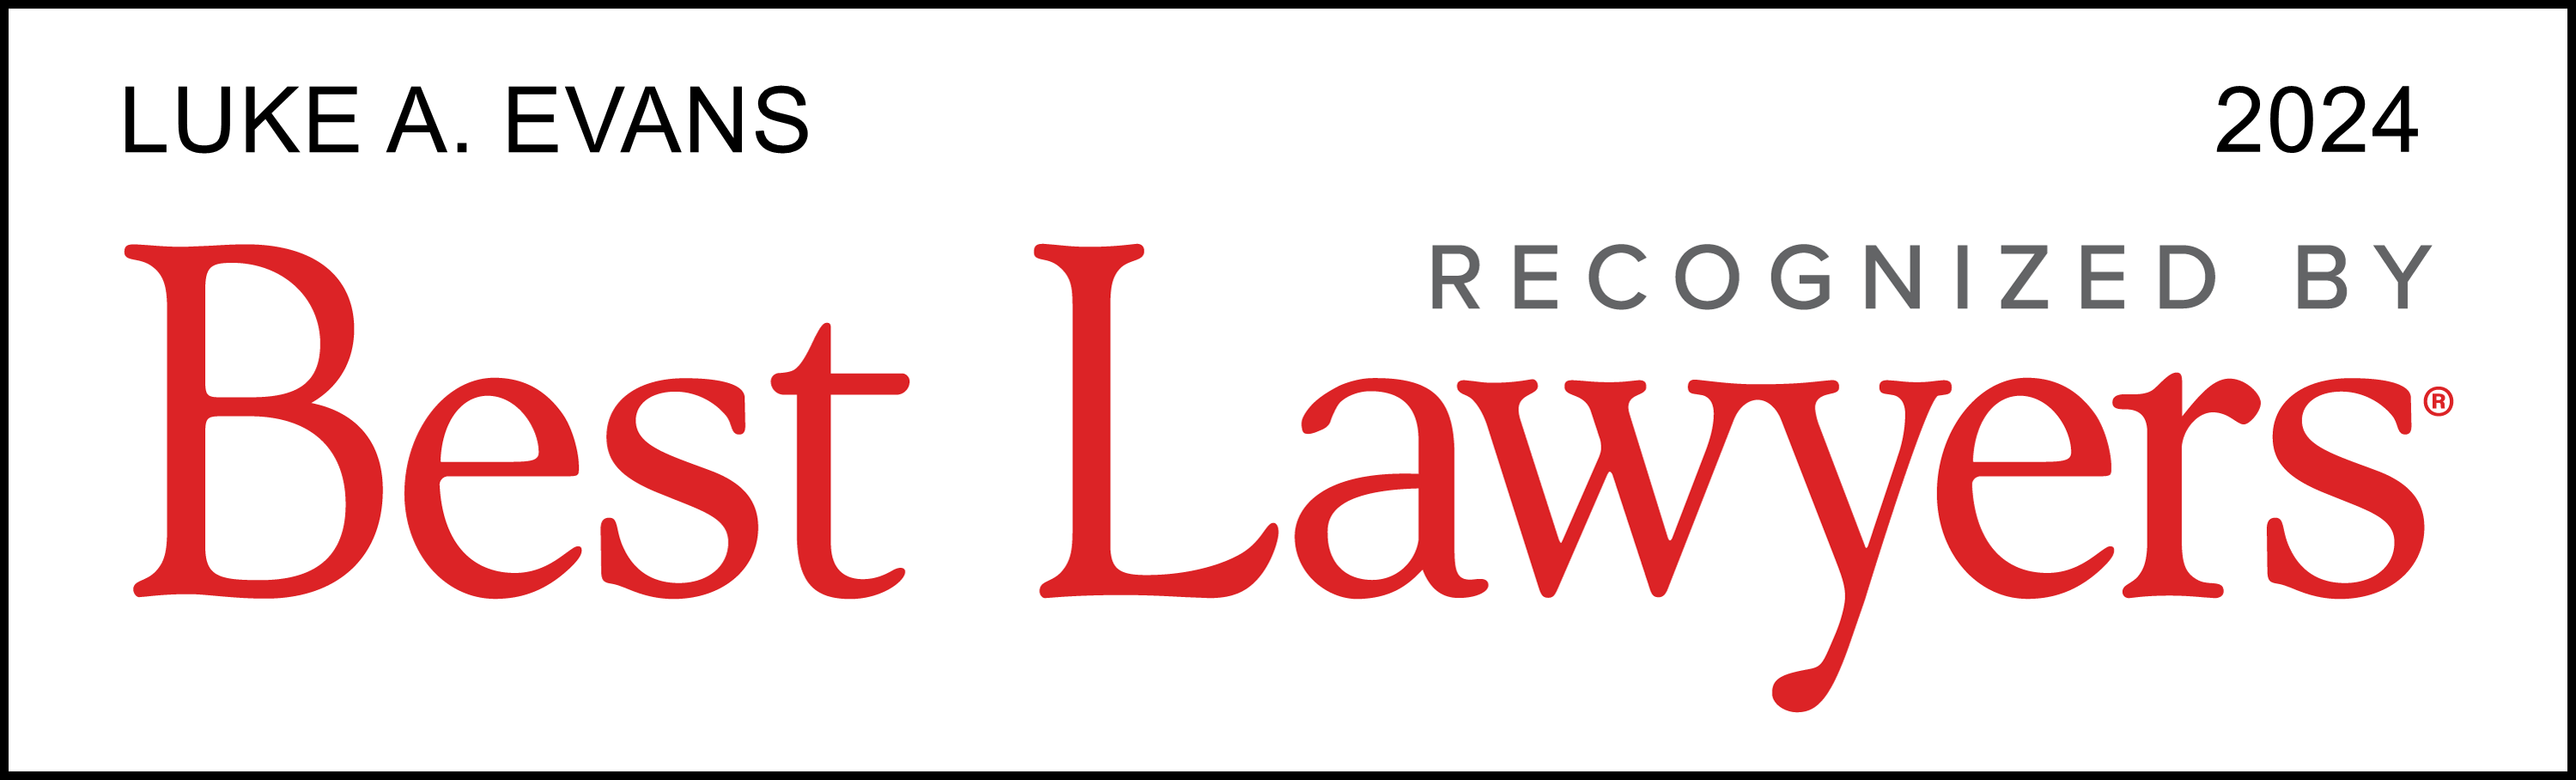 Luke A. Evans 2024 Recognized by Best lawyers